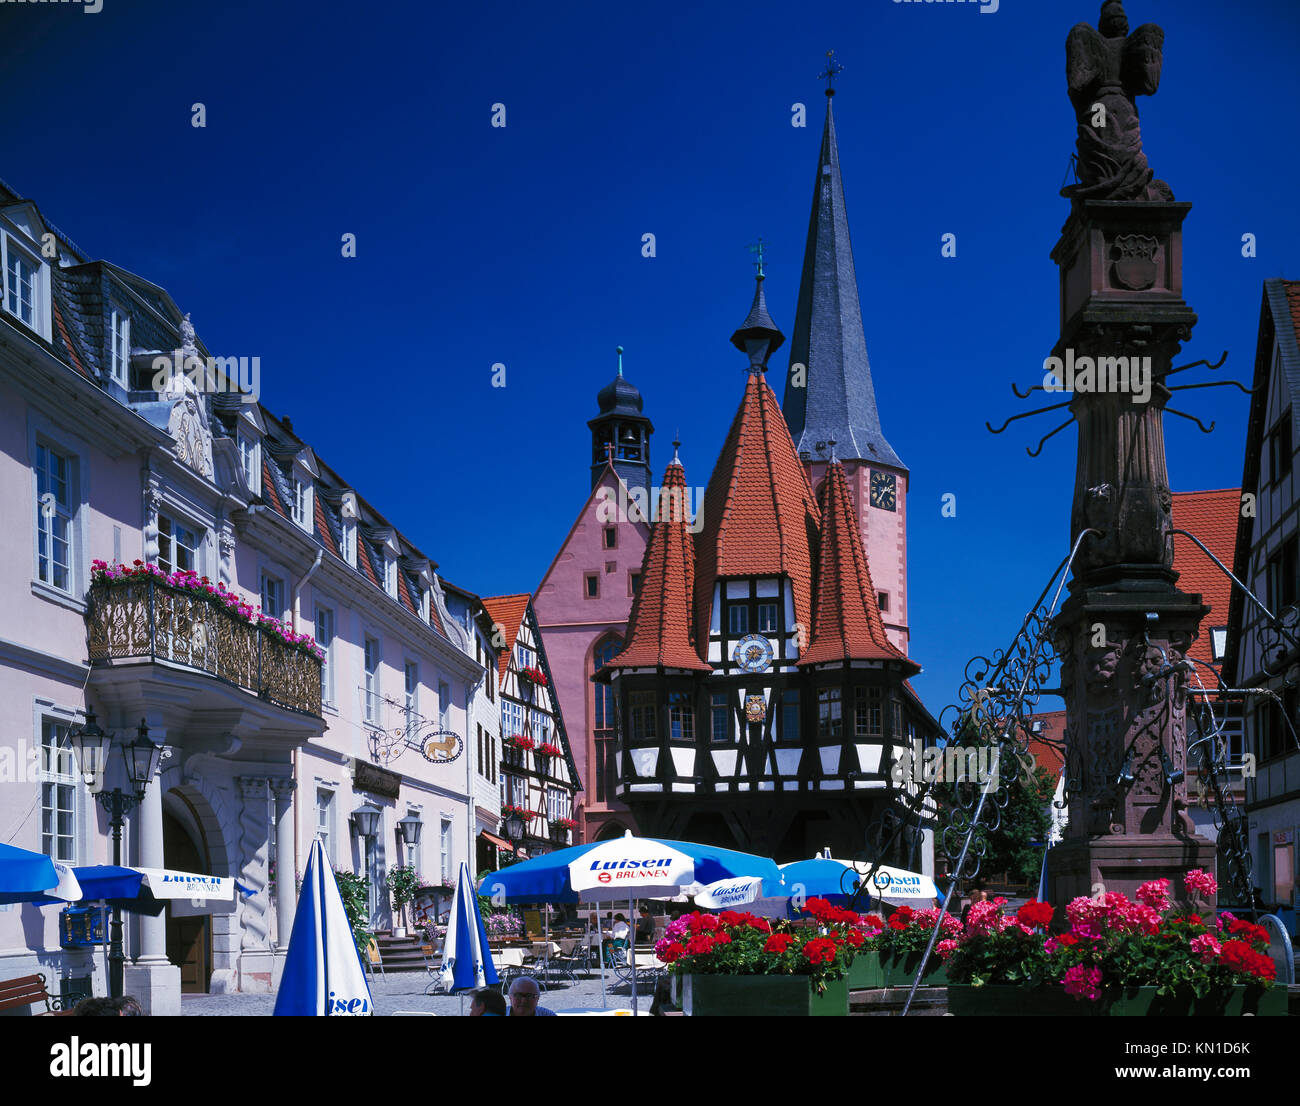 Historical city hall, market place, half-timbered houses, Michelstadt, Odenwald, Hesse, Germany. Stock Photo